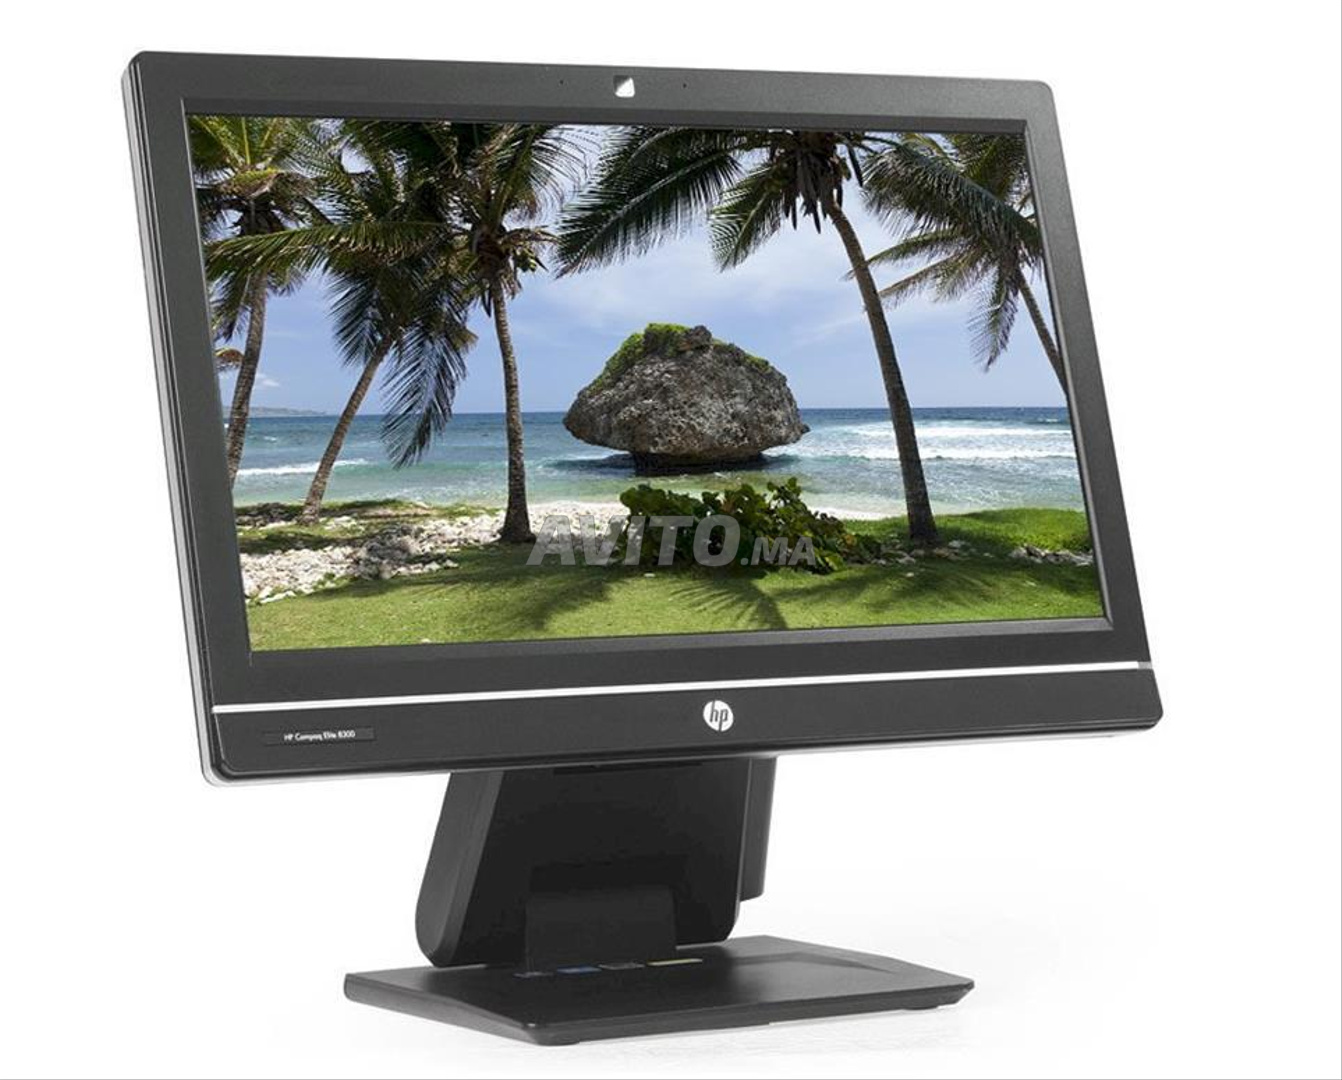 Pc Hp Aio 8300 A A Benmssik - 5